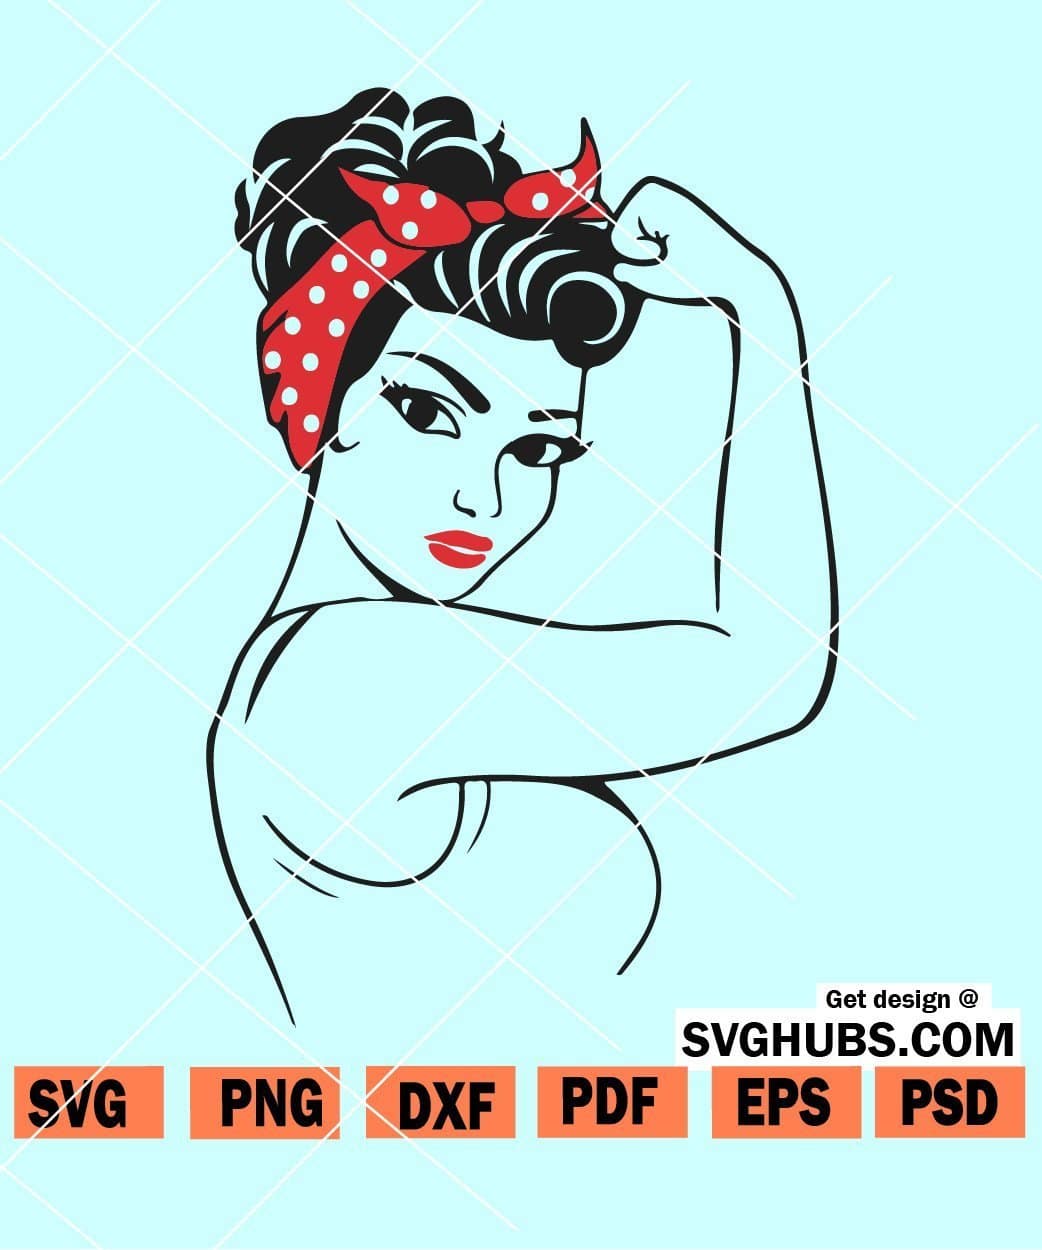 Strong Woman Silhouette SVG